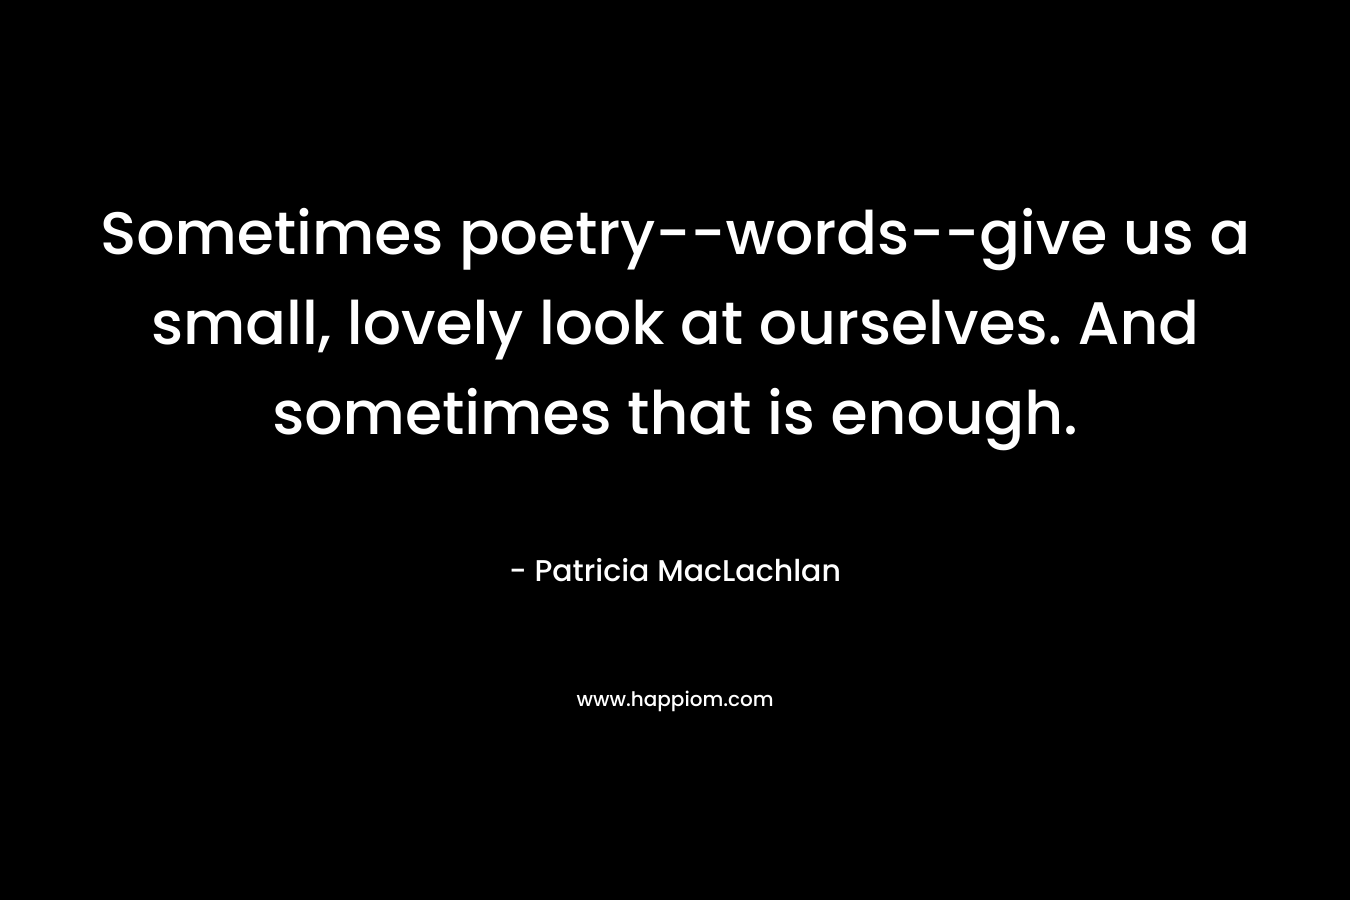 Sometimes poetry--words--give us a small, lovely look at ourselves. And sometimes that is enough.